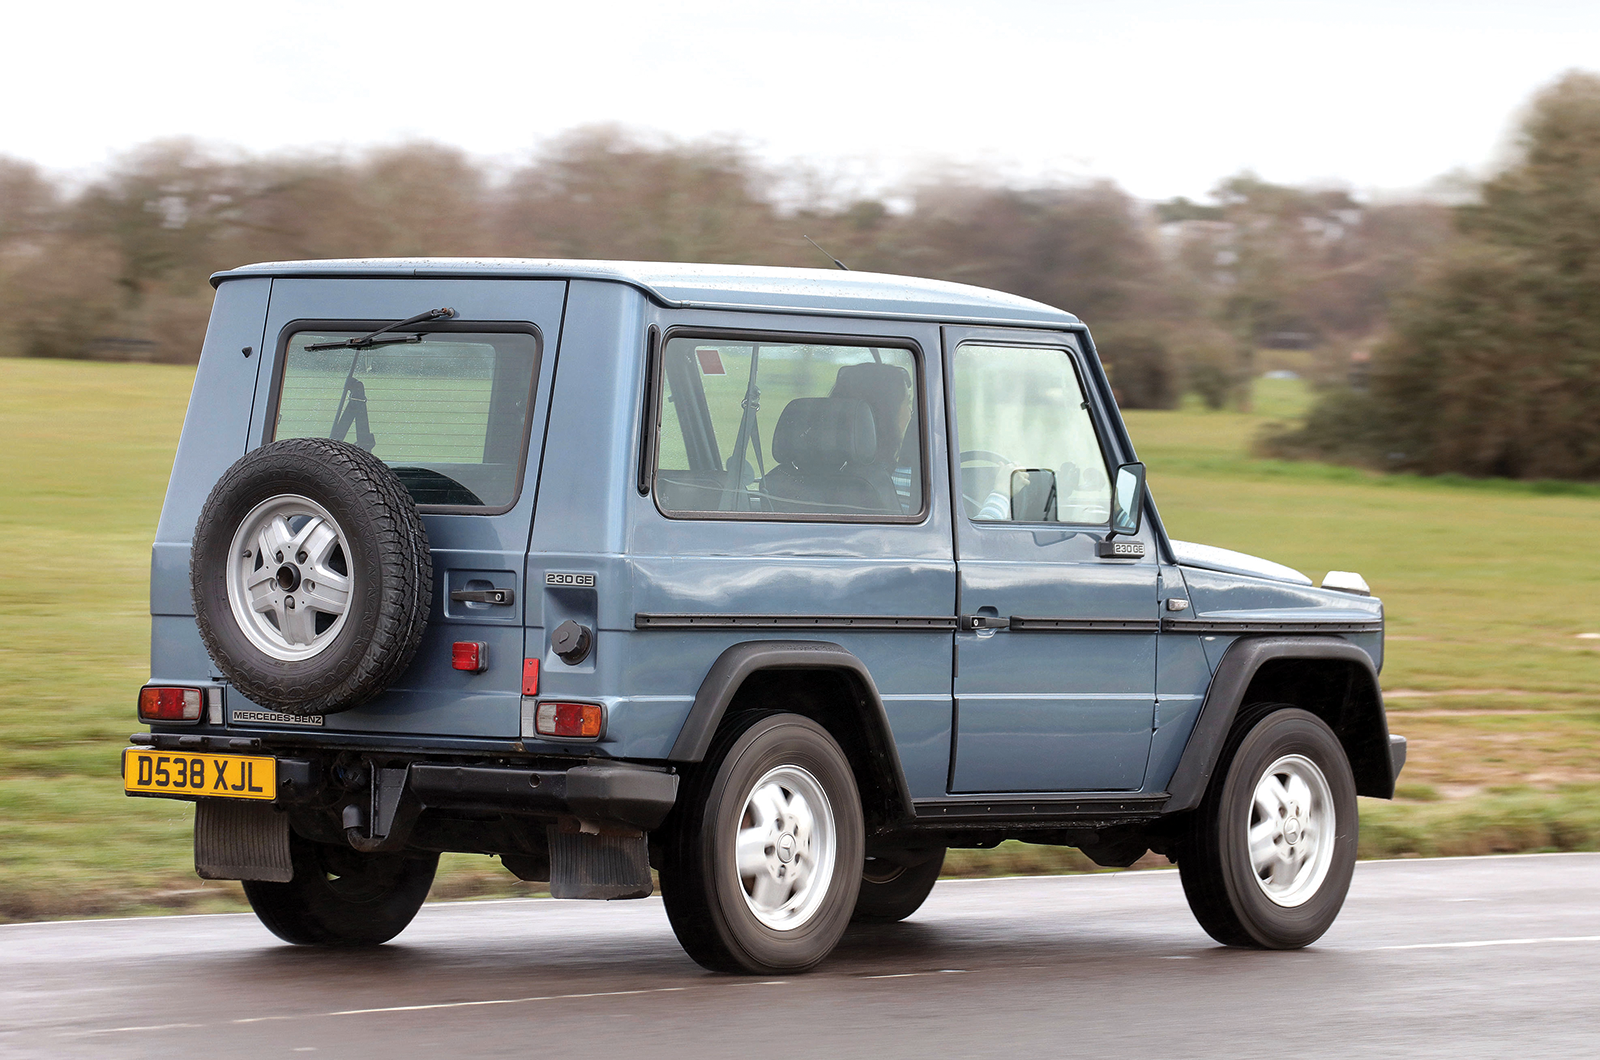 Mercedes-Benz G-Wagen buyer's guide: what to pay and what to look for